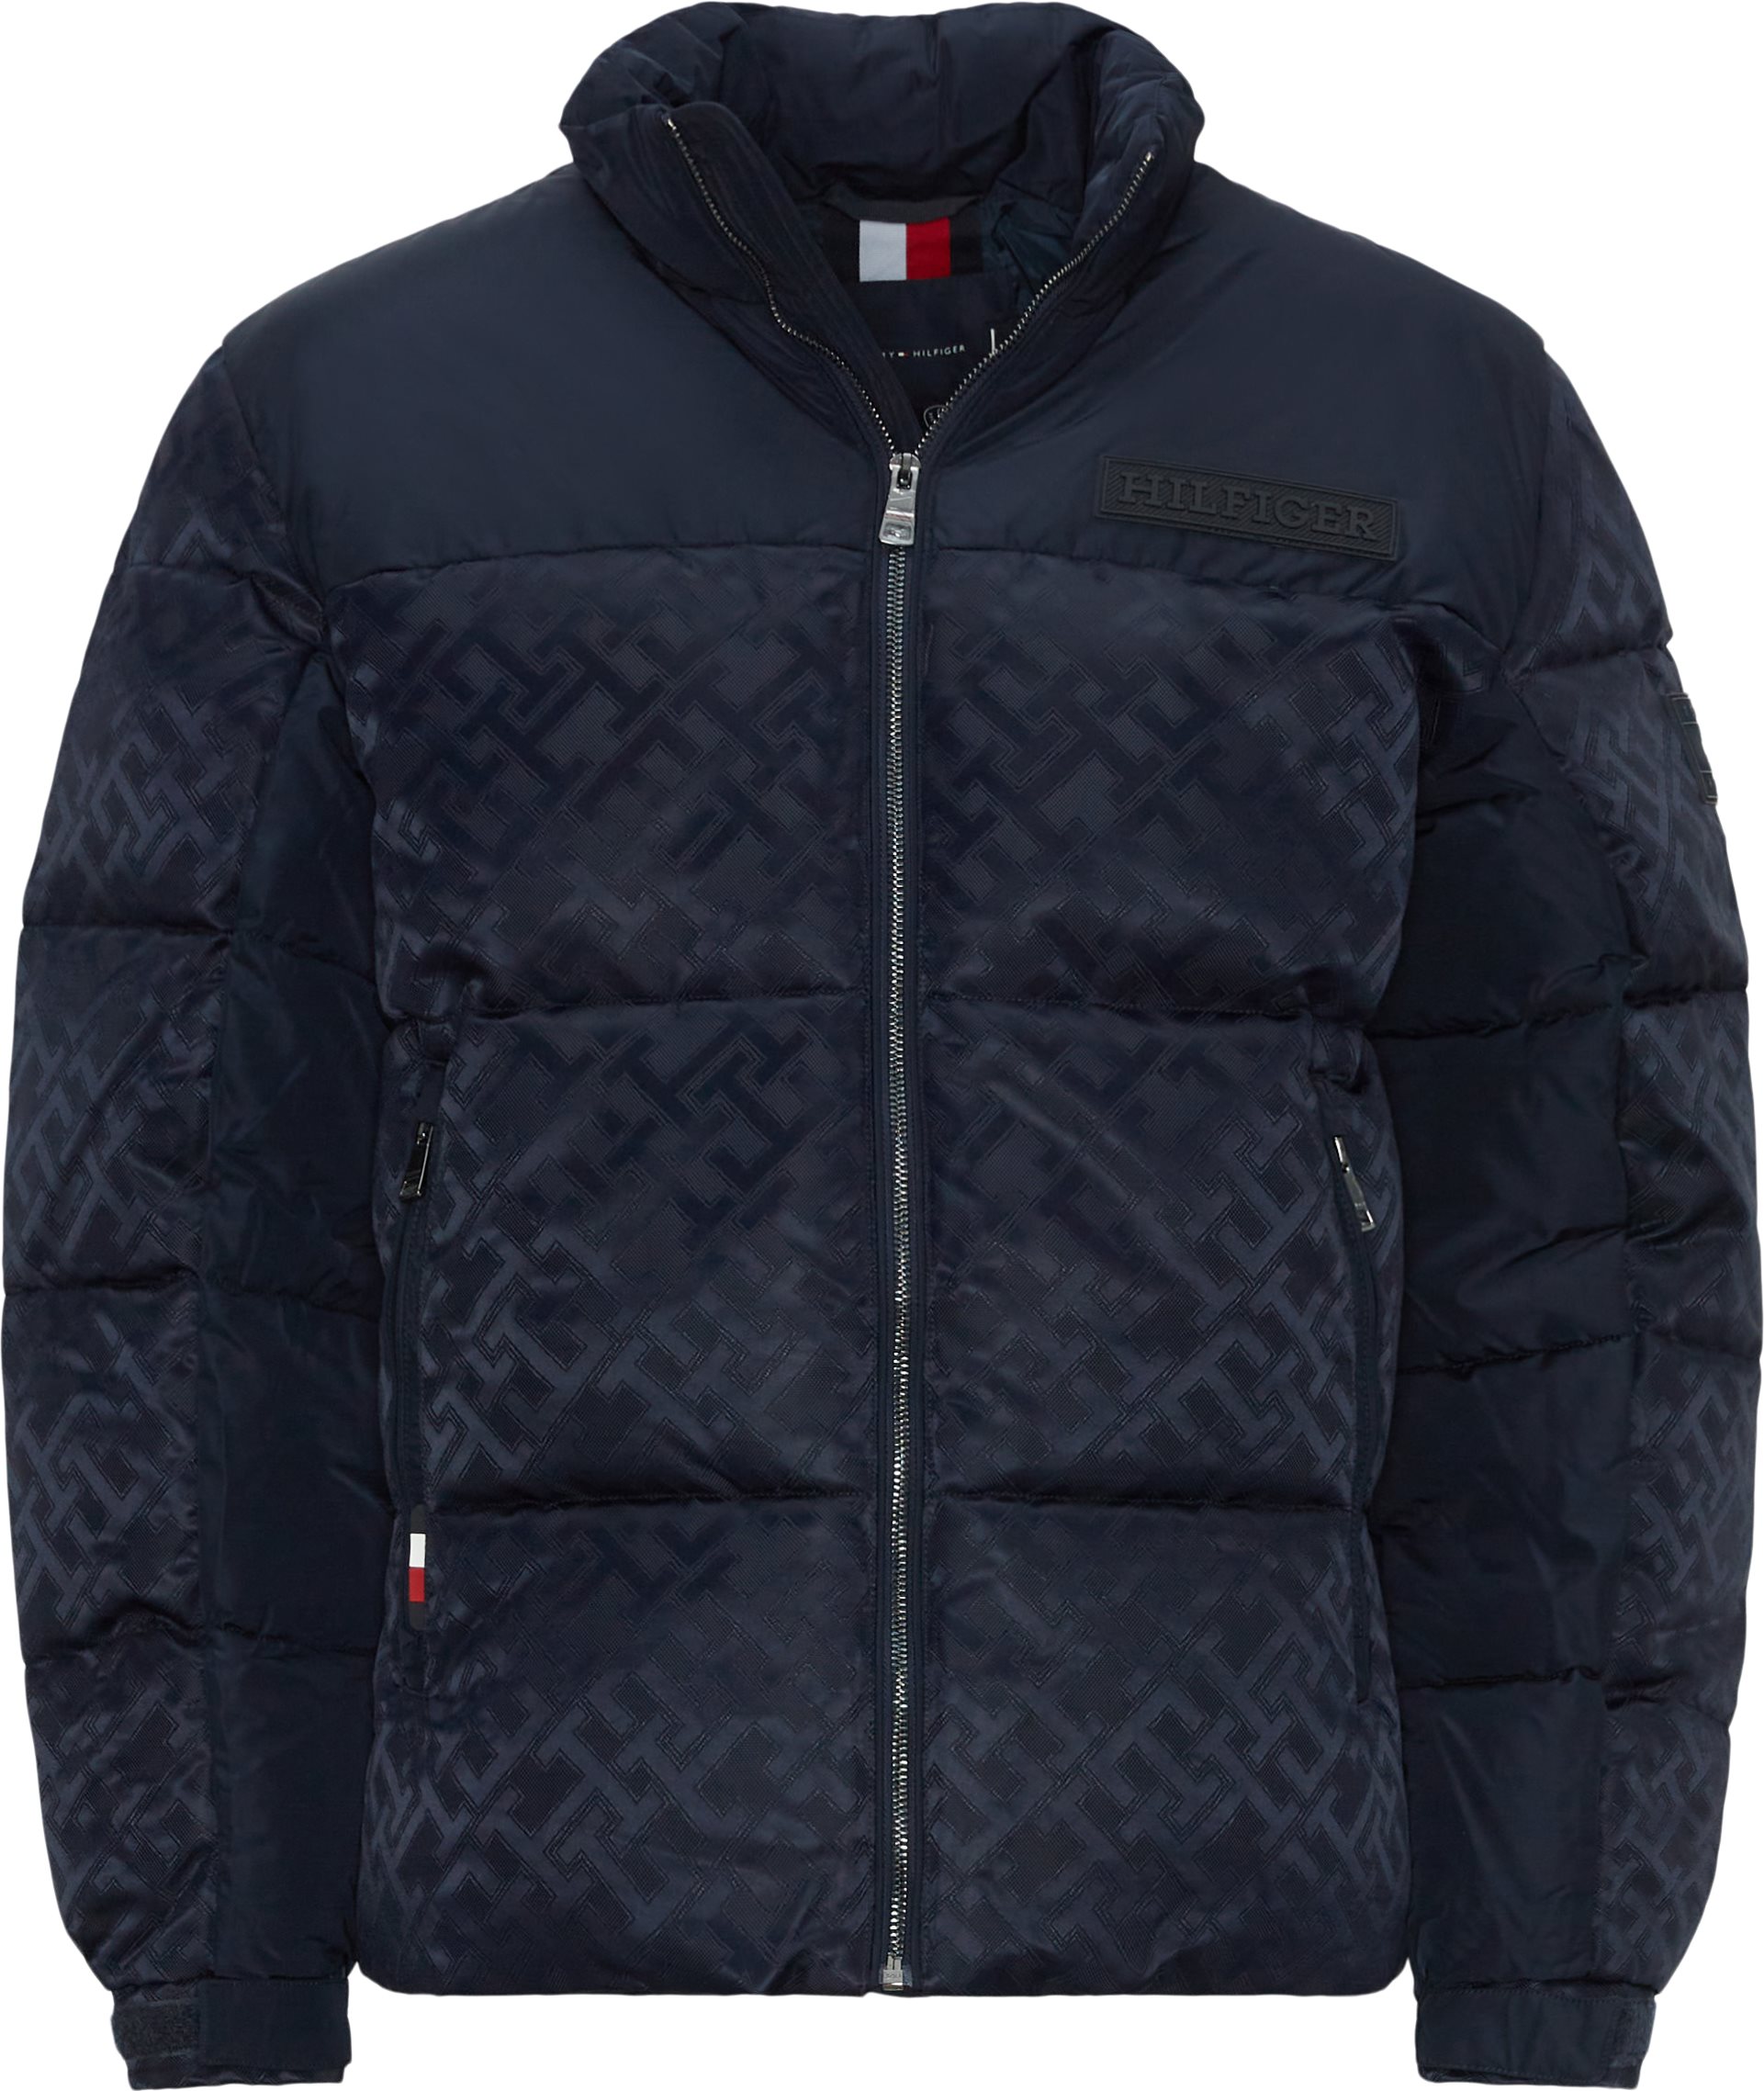 33430 NEW YORK MONOGRAM PUFFER Jackets NAVY from Tommy Hilfiger 268 EUR